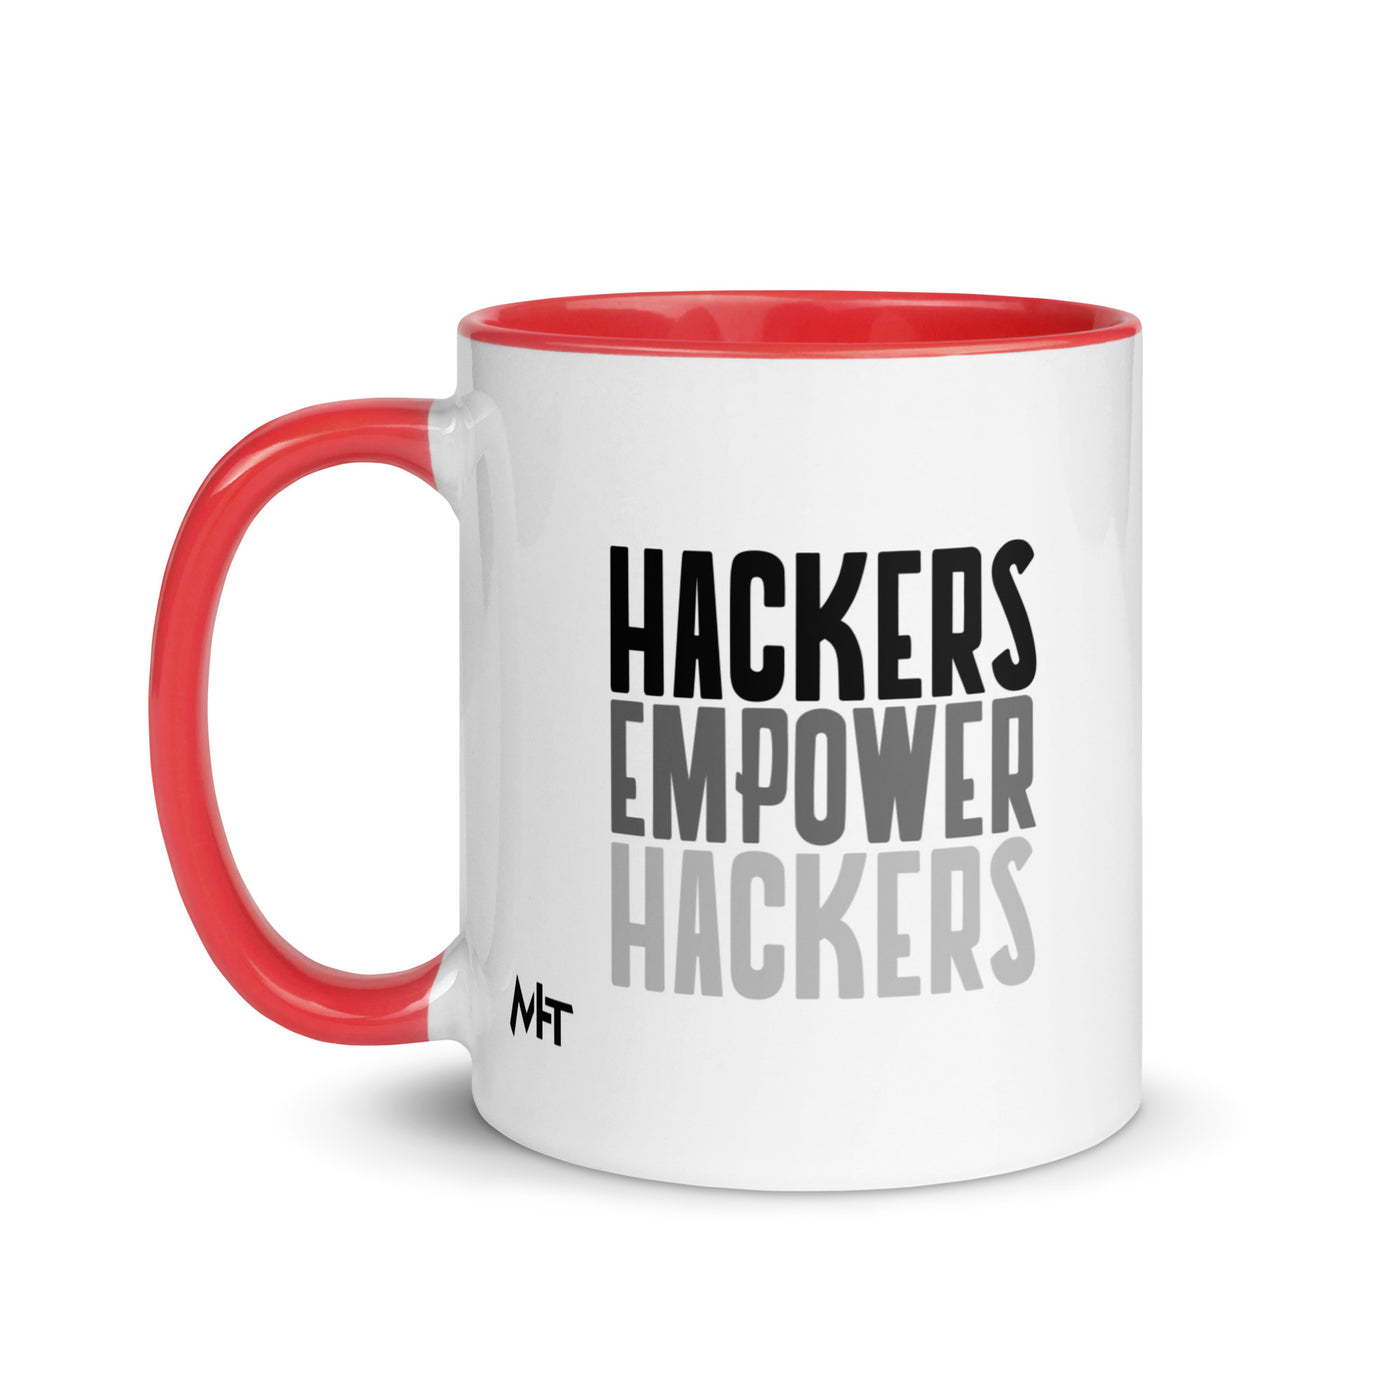 Hackers Empower Hackers - Mug with Color Inside